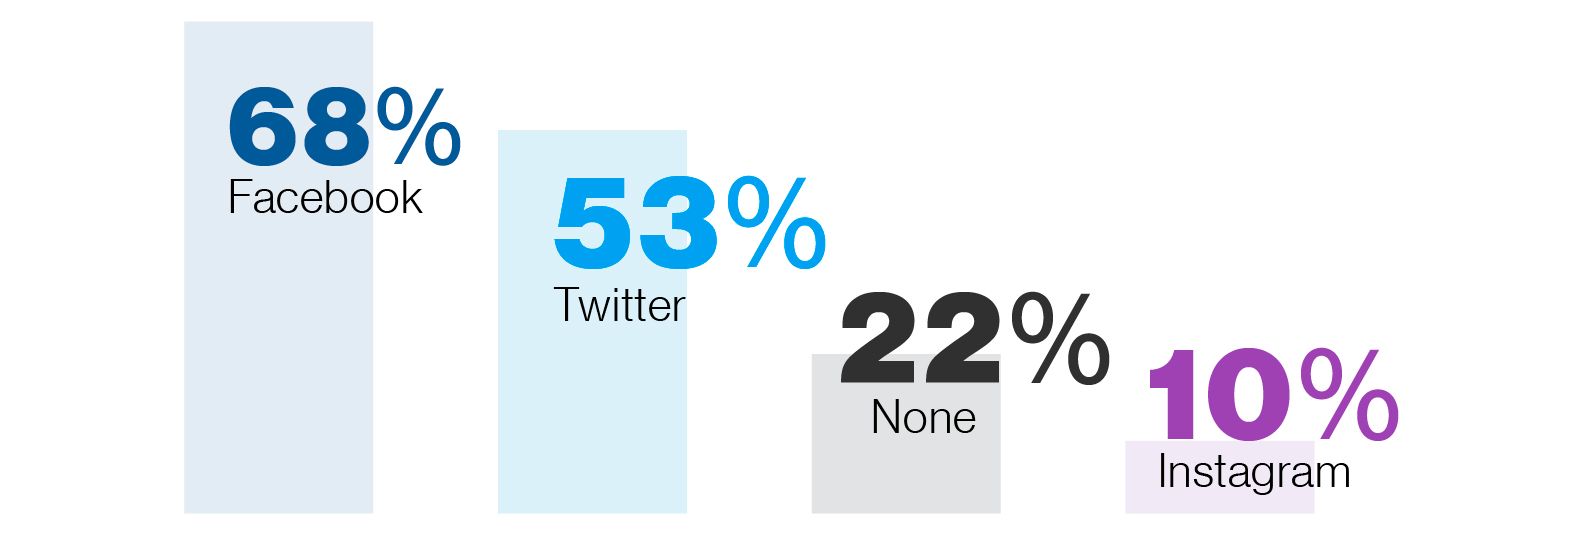 Graph: 68% of districts use Facebook, 53% use Twitter, 22% use None, and 10% use Instagram